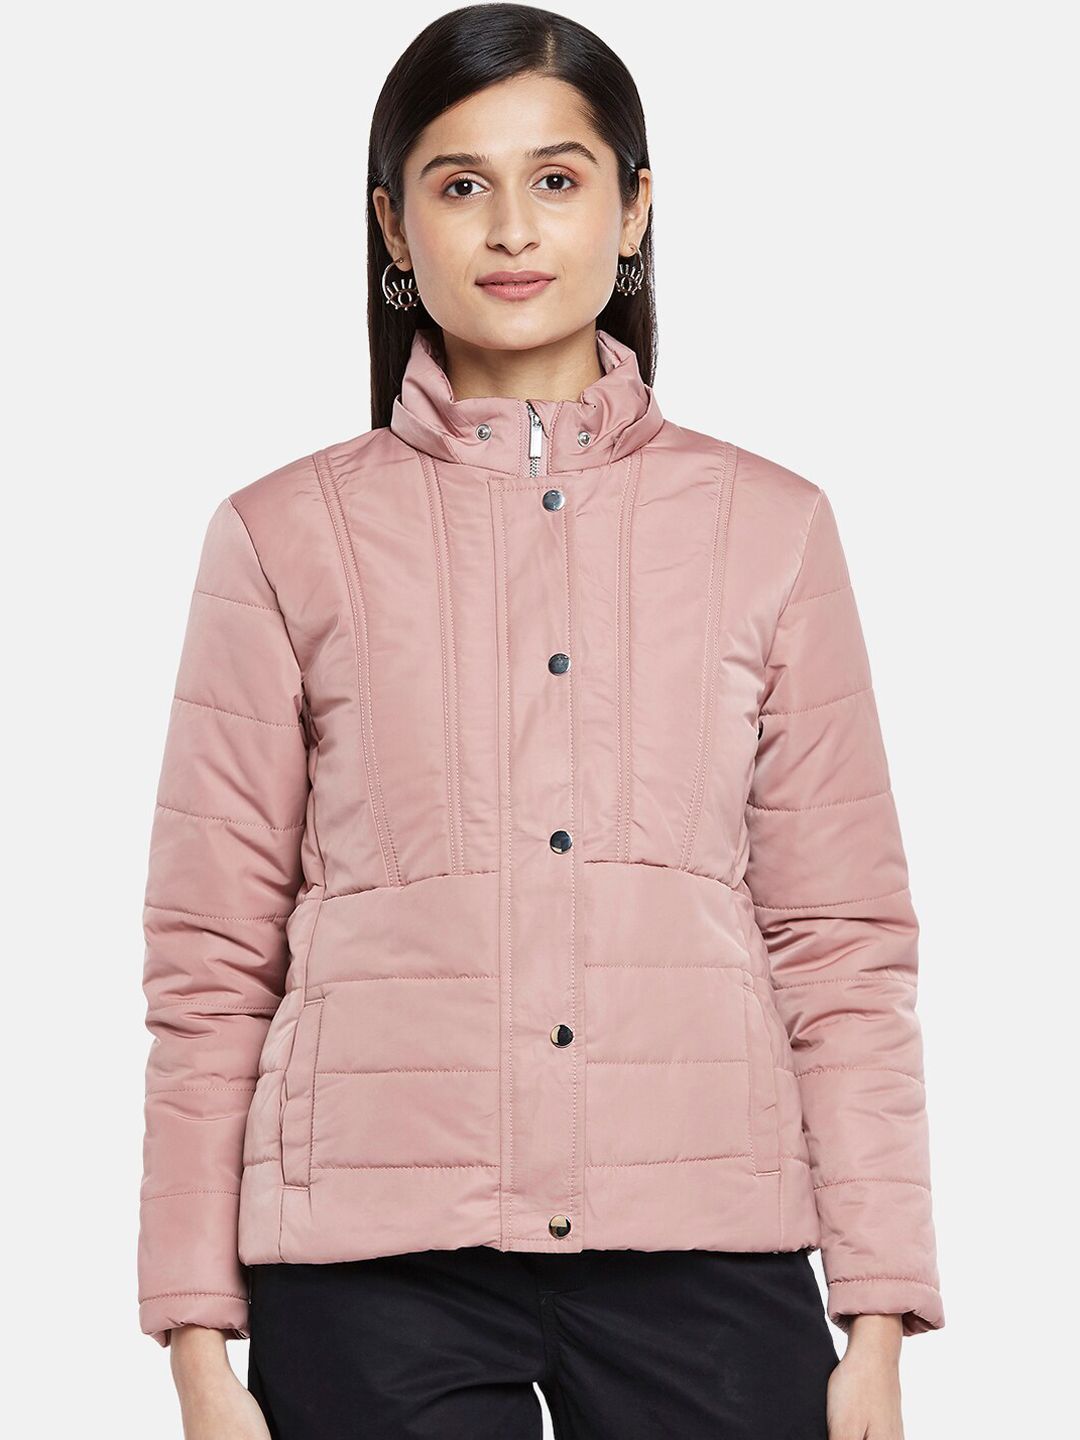 Honey by Pantaloons Women Peach-Coloured Puffer Jacket Price in India